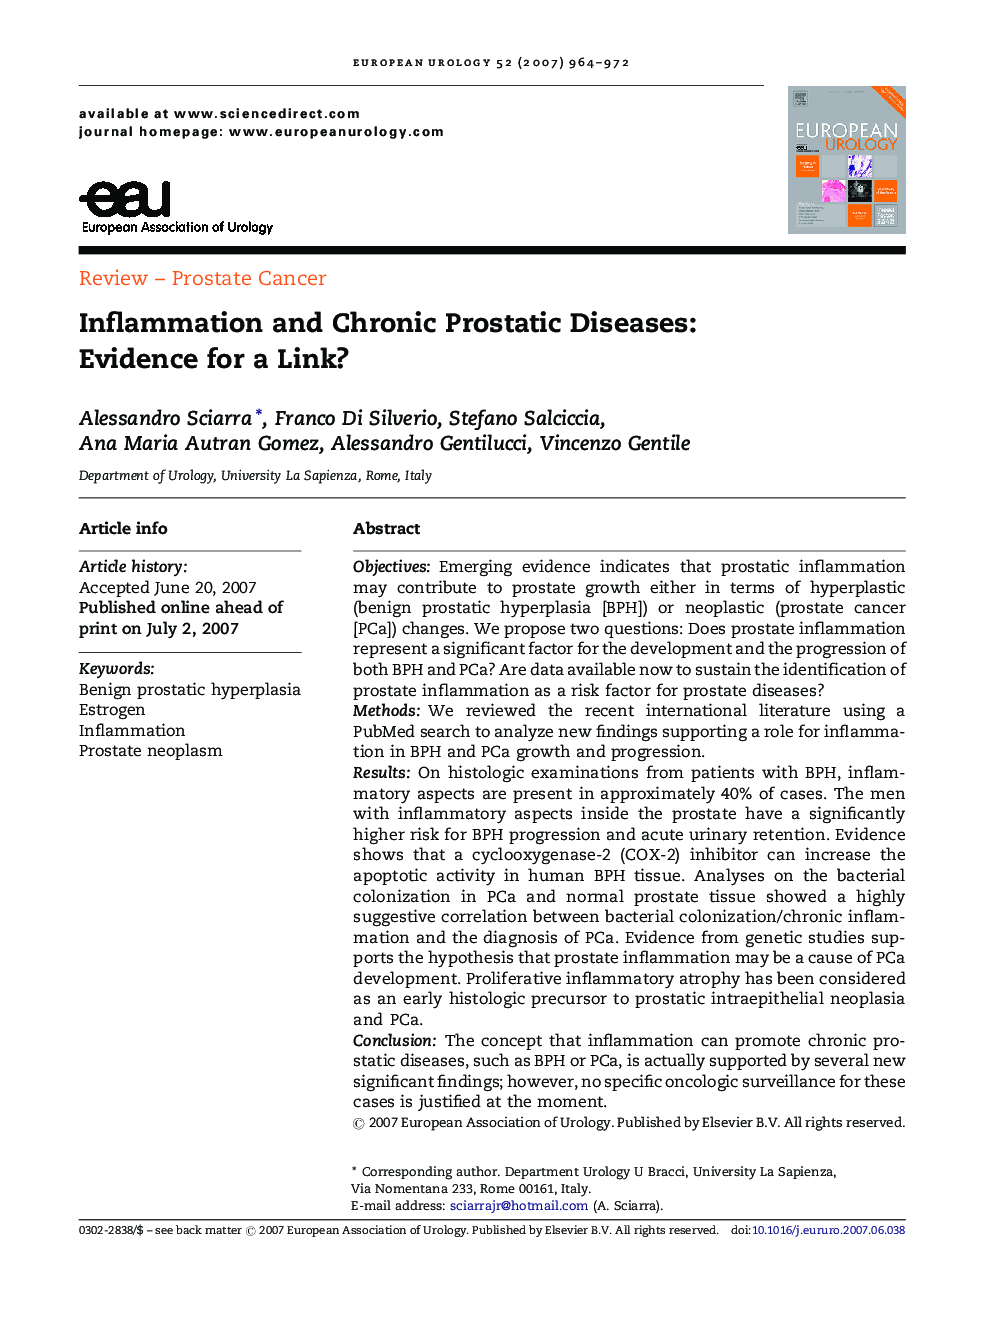 Inflammation and Chronic Prostatic Diseases: Evidence for a Link?